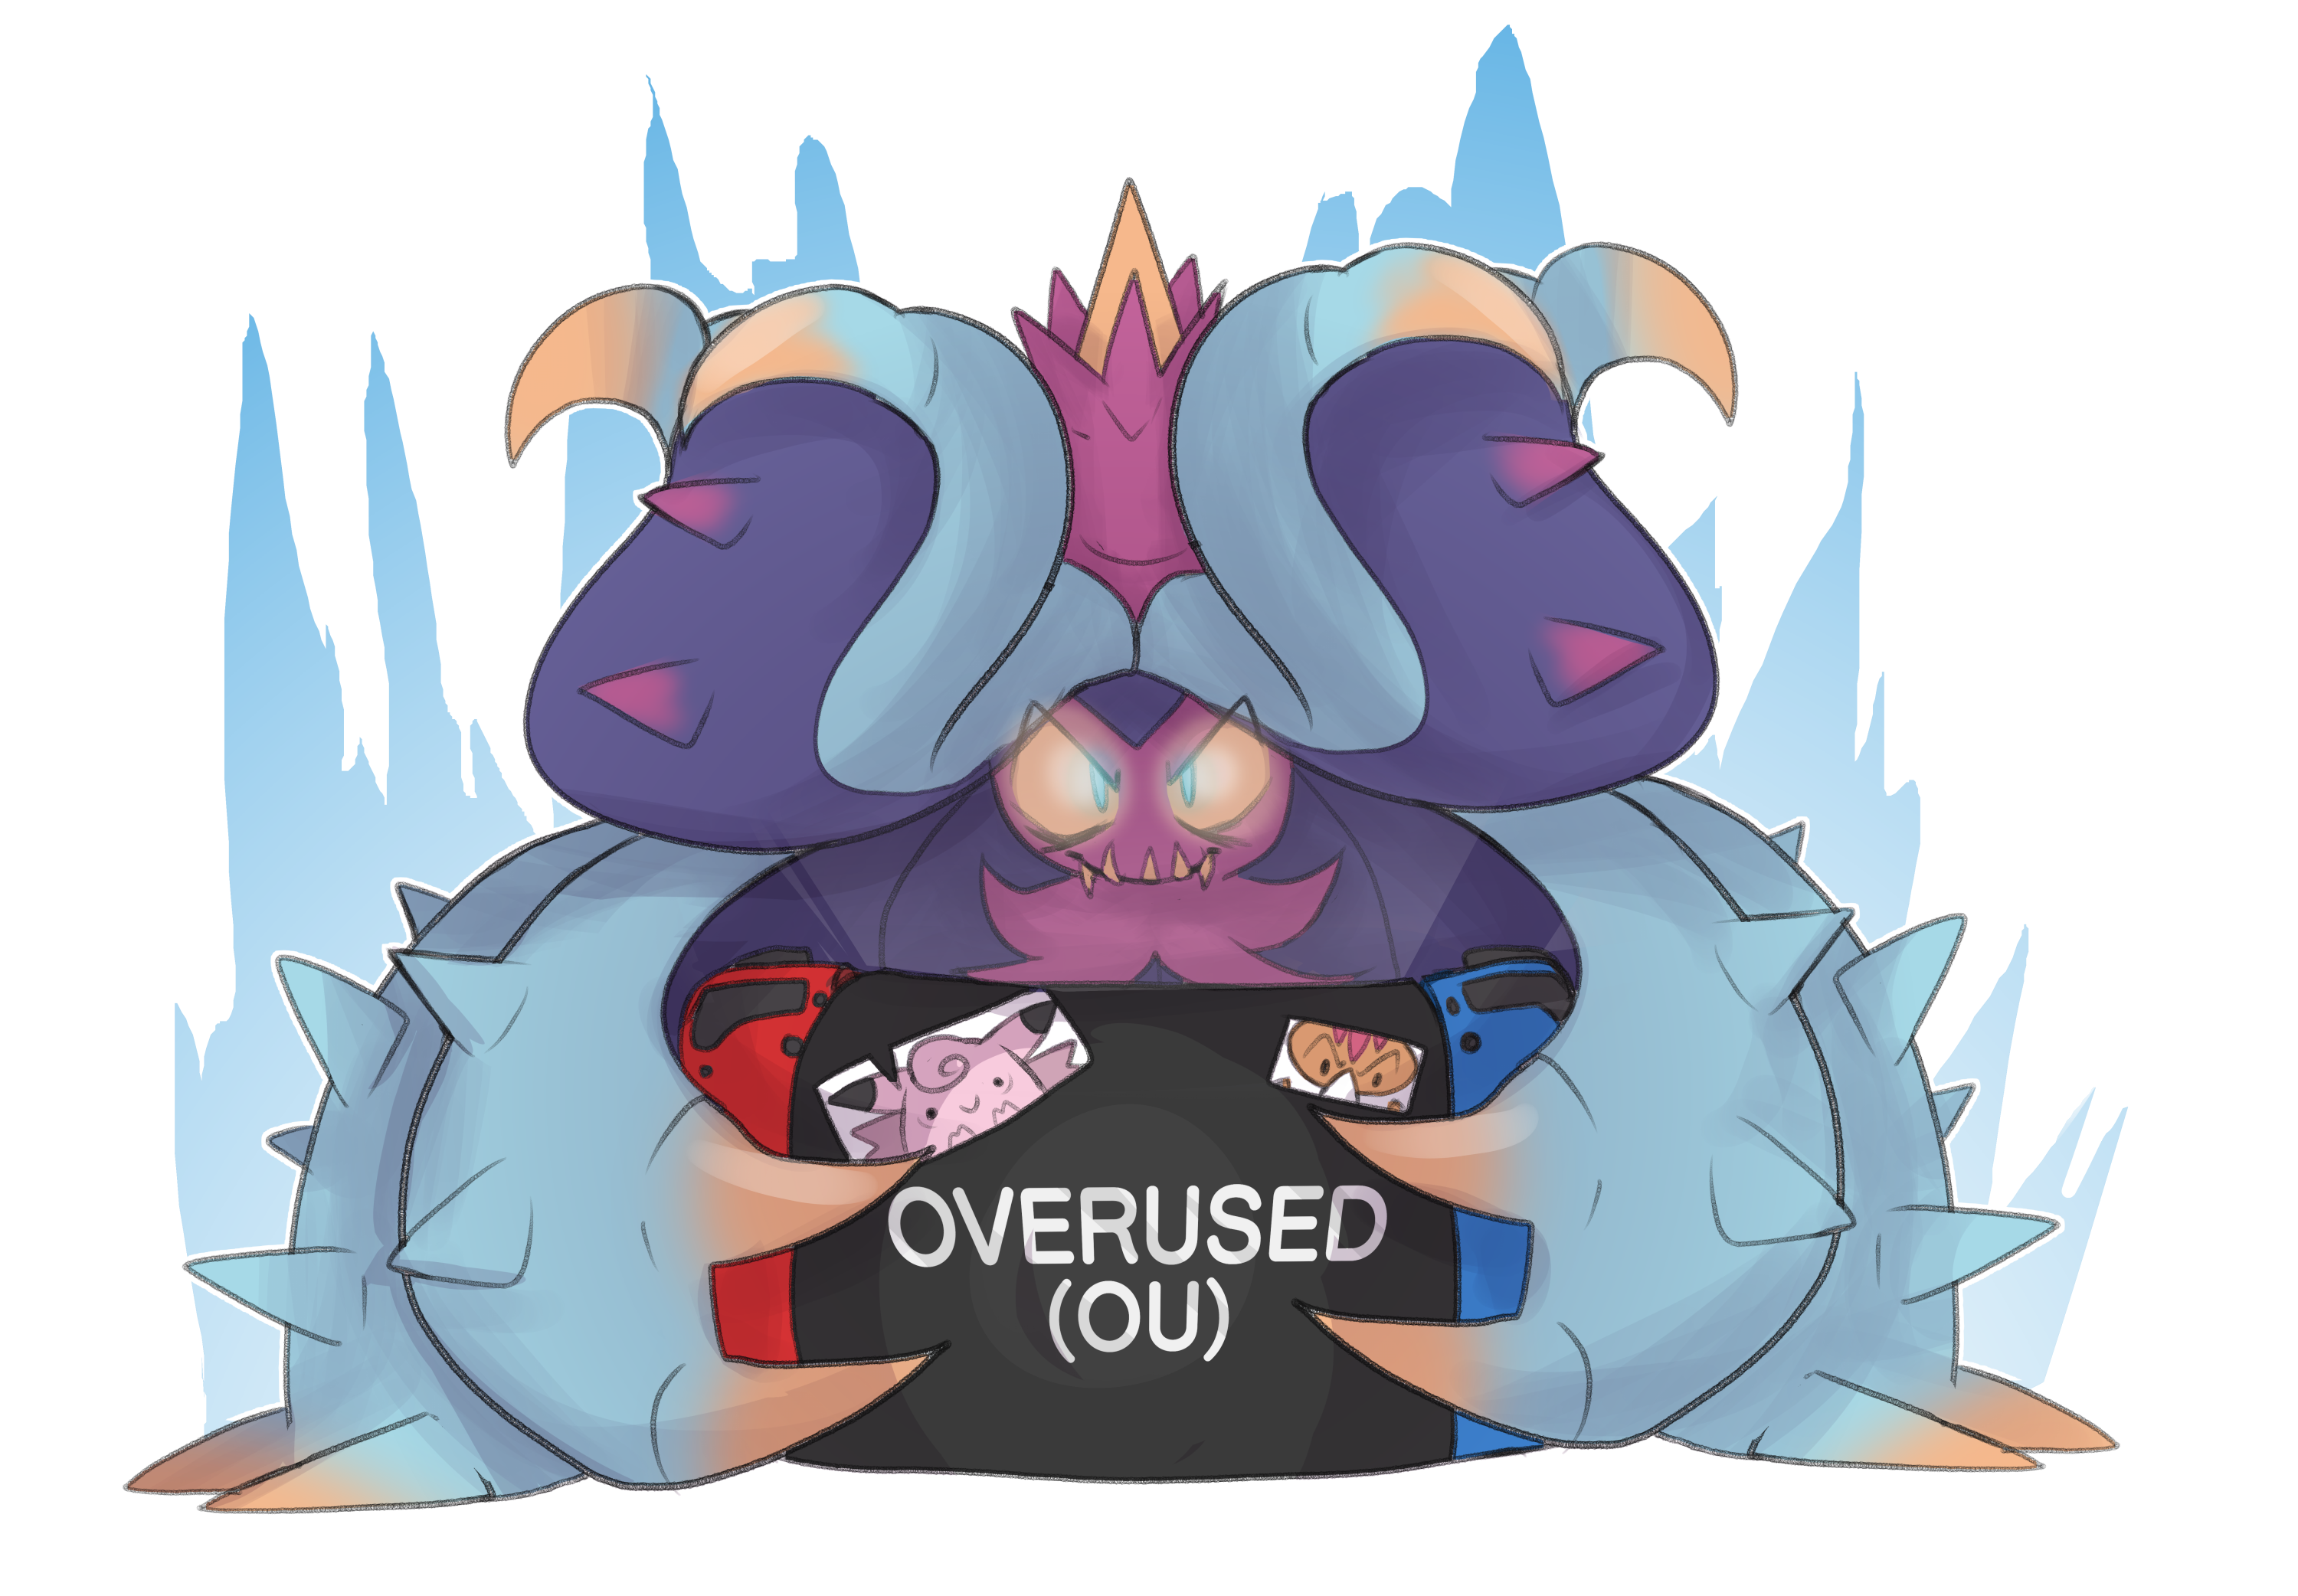 You can try out the Other Metagames of - Smogon University